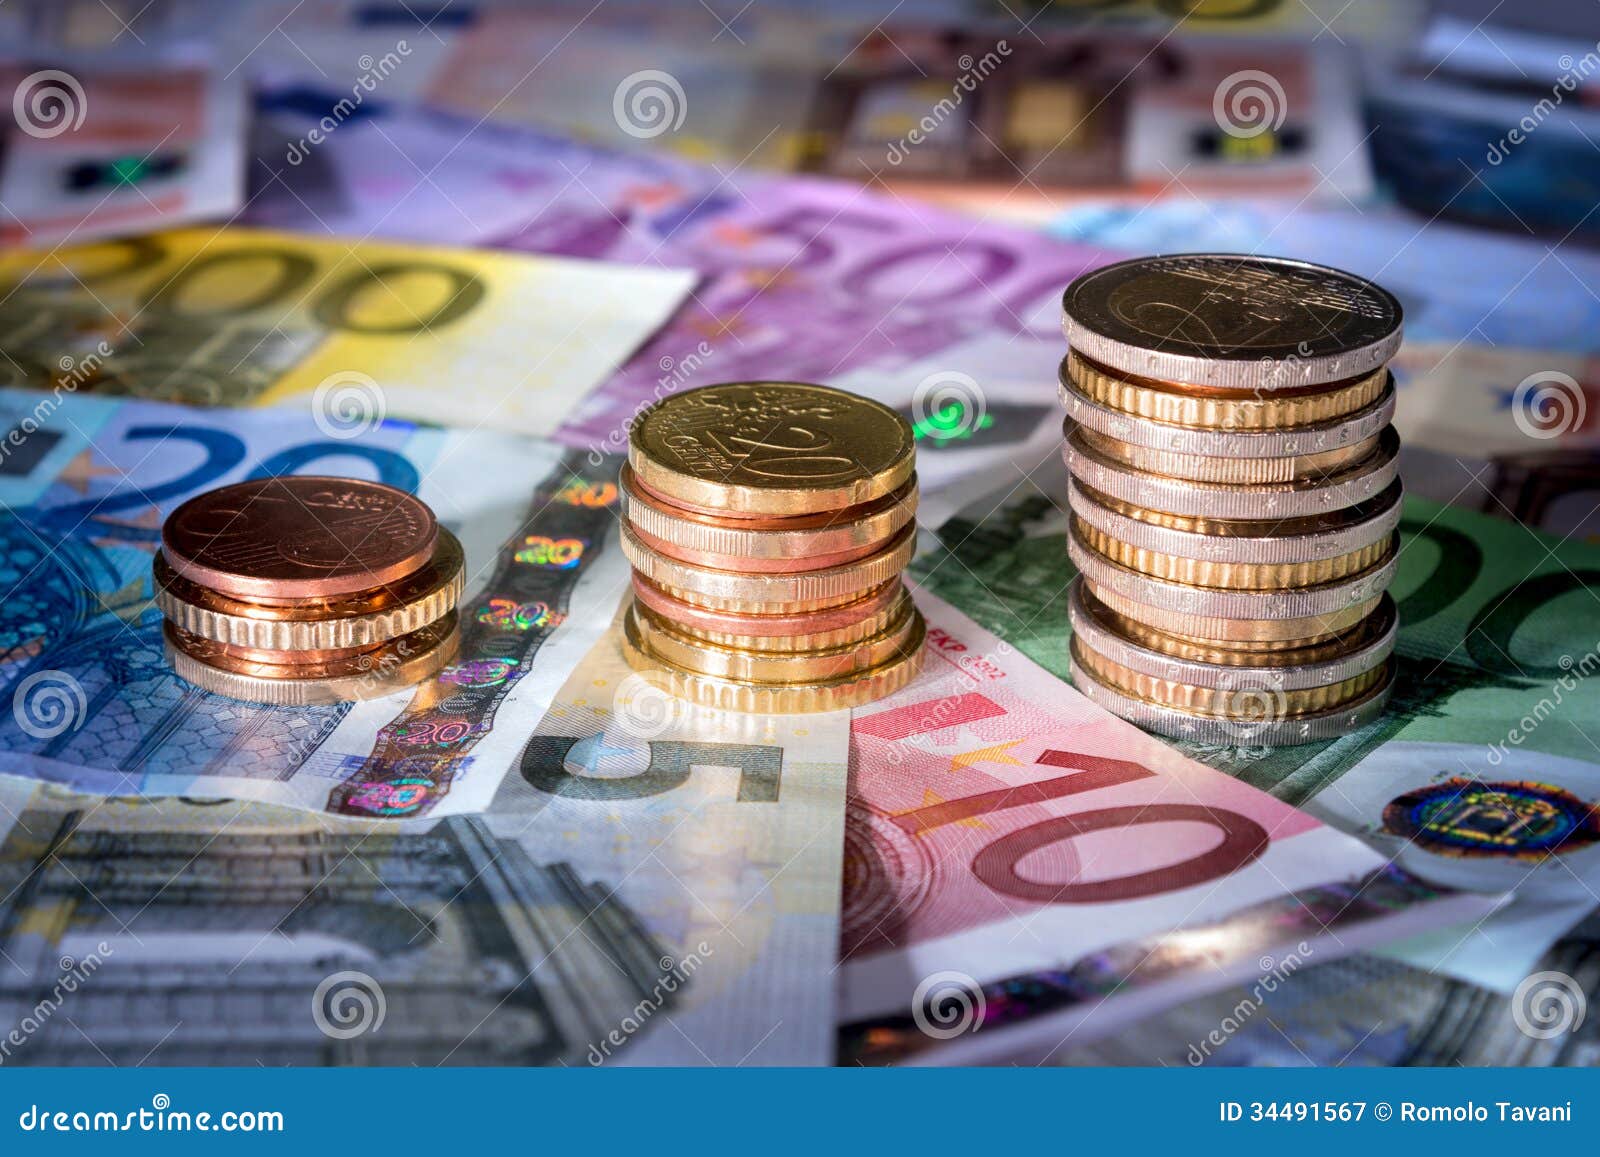 Coins Chart On Euro Banknotes Stock Exchange, Money In ...